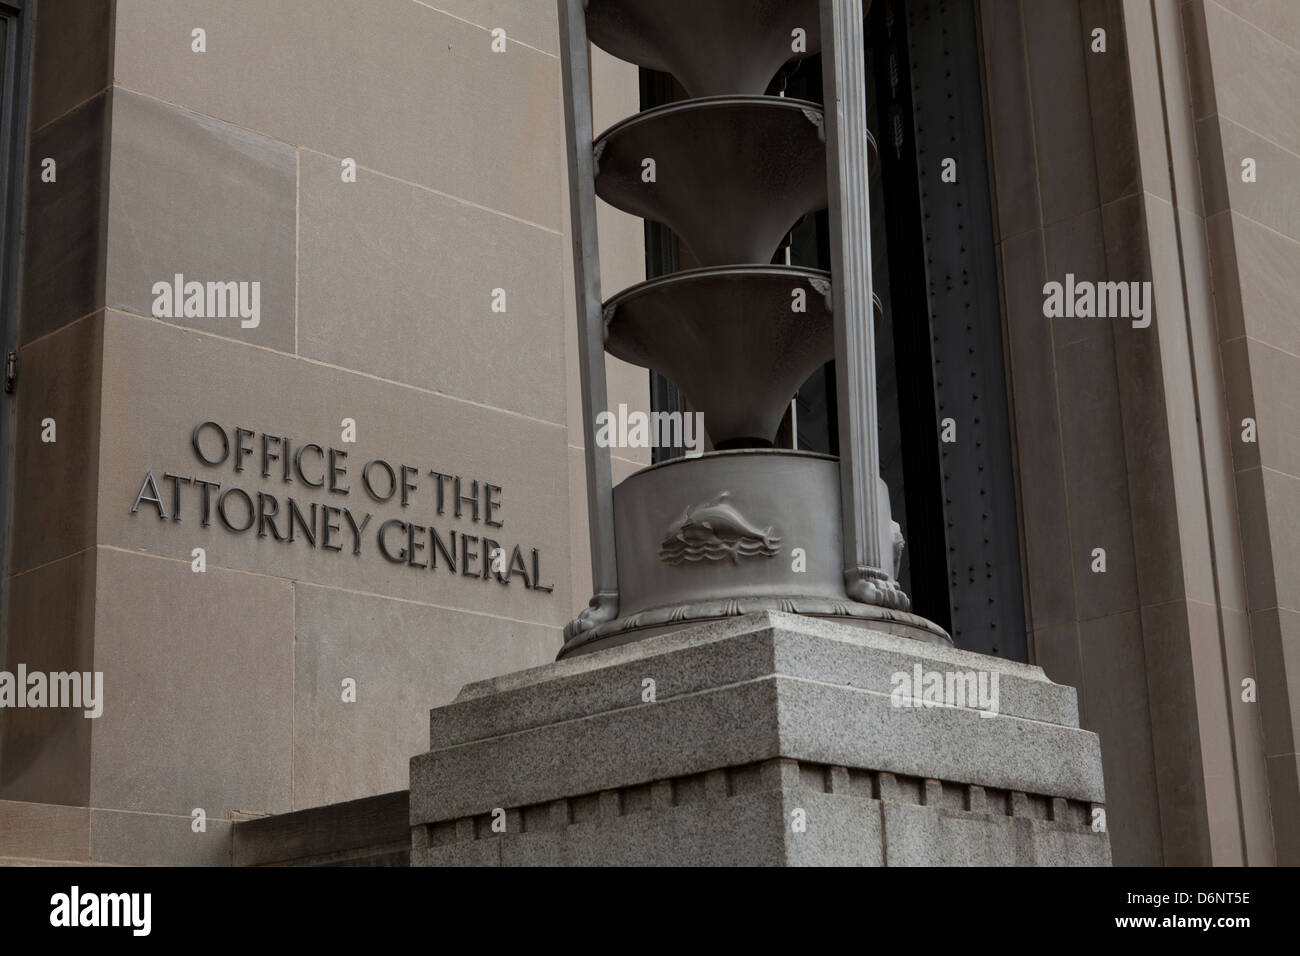 Office of the Attorney General - Department of Justice building, Washington DC Stock Photo